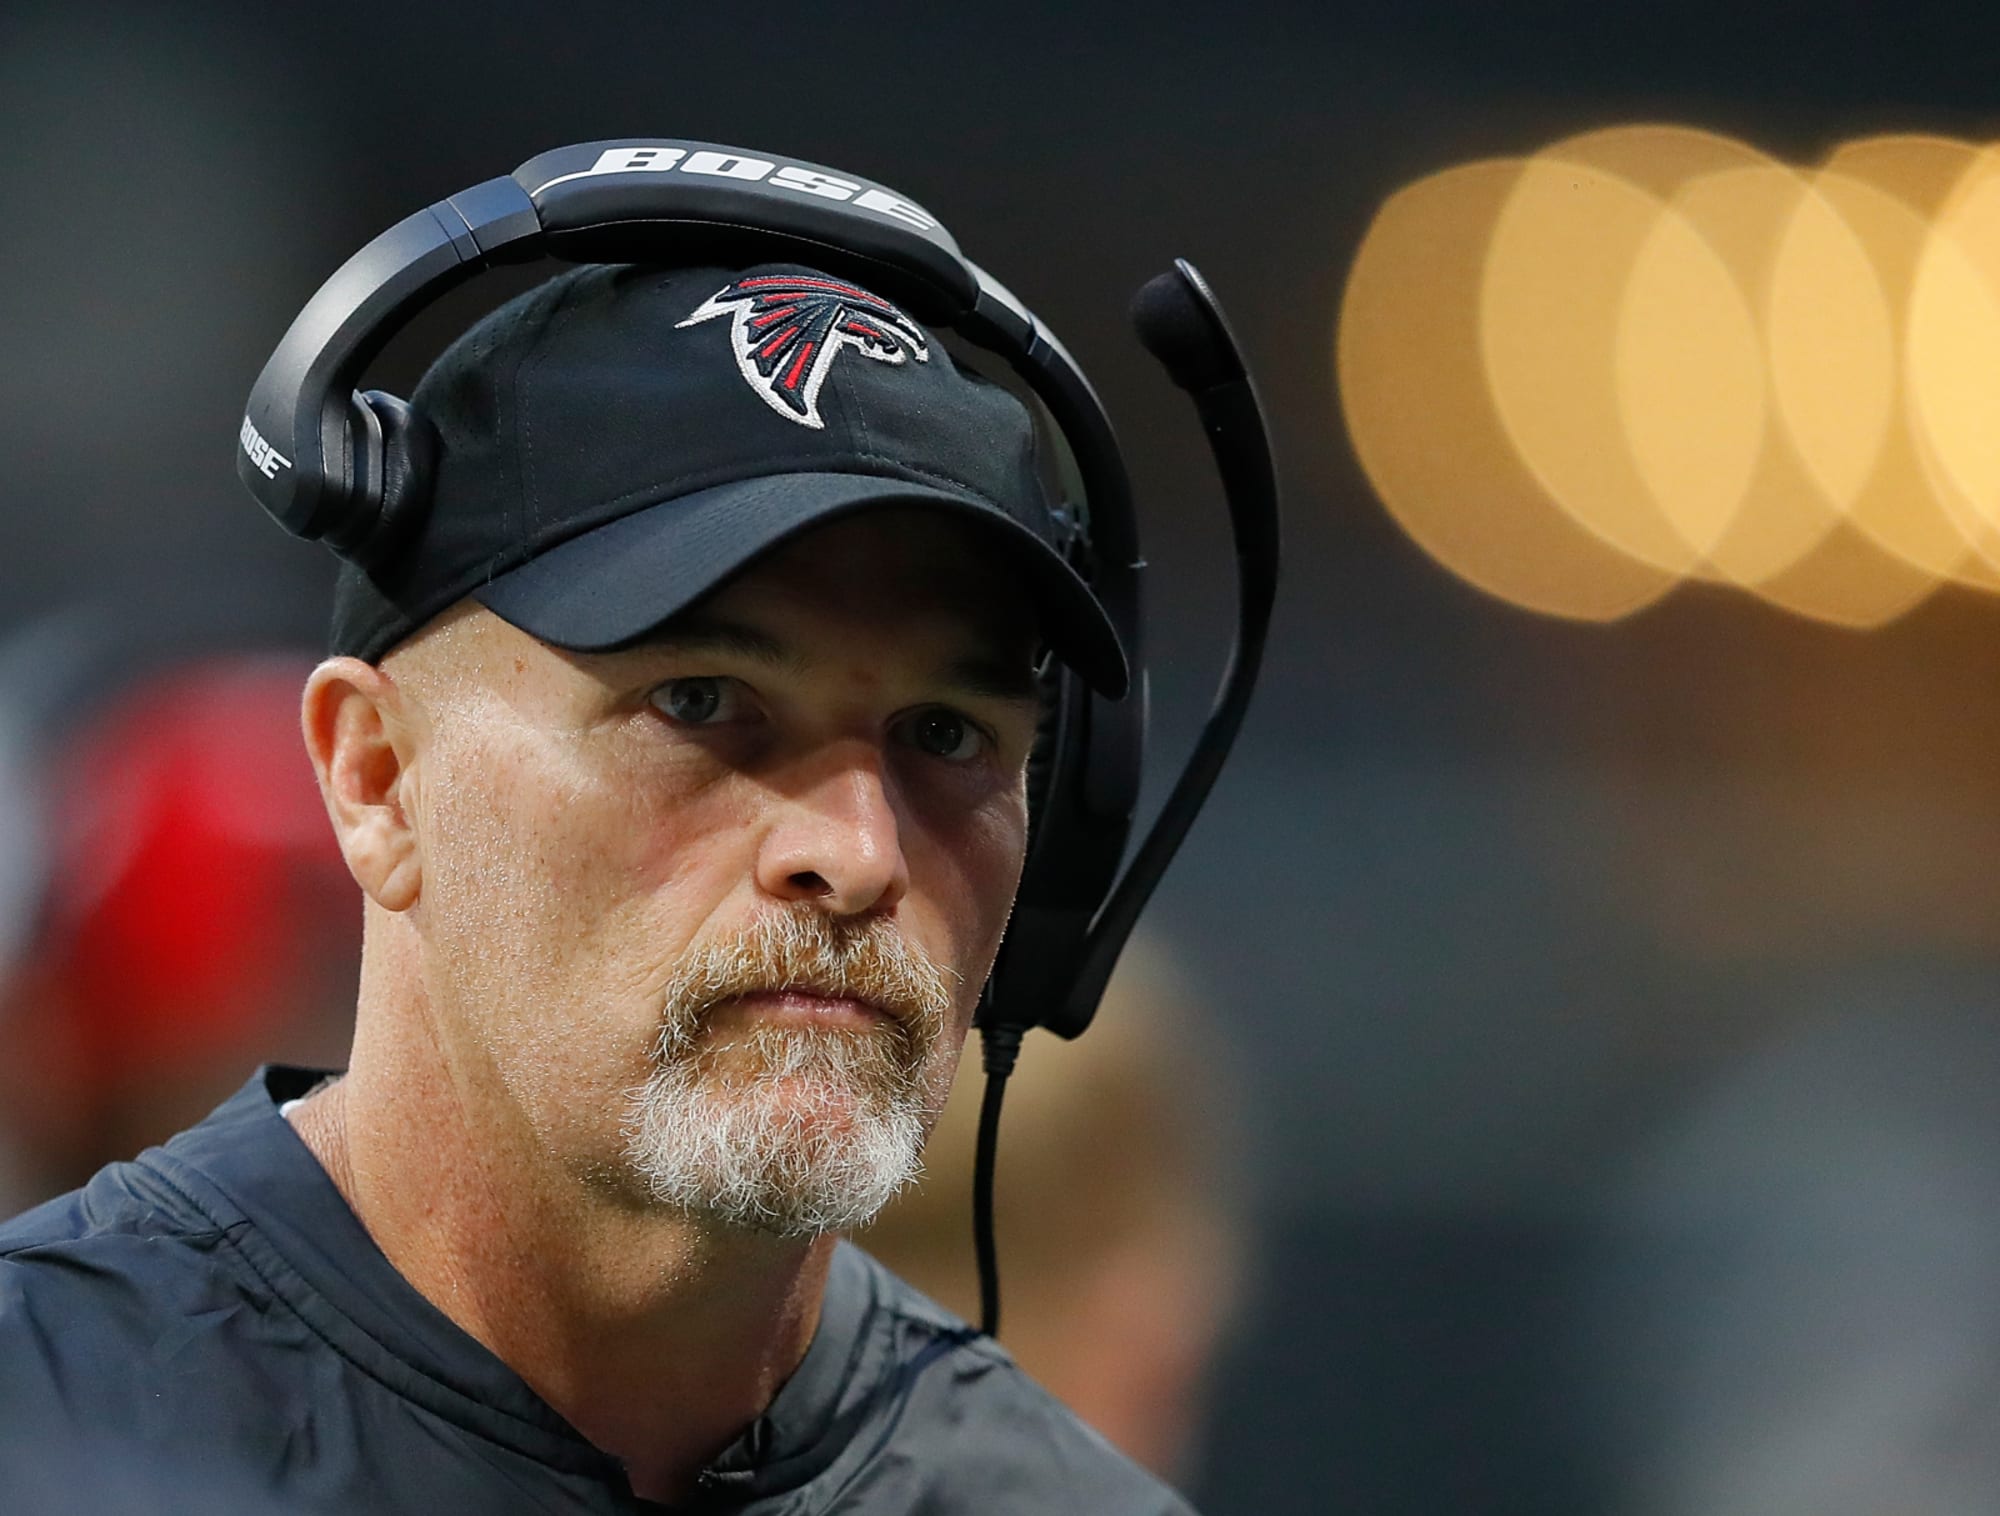 Honest evaluations should lead to new heights for the Atlanta Falcons